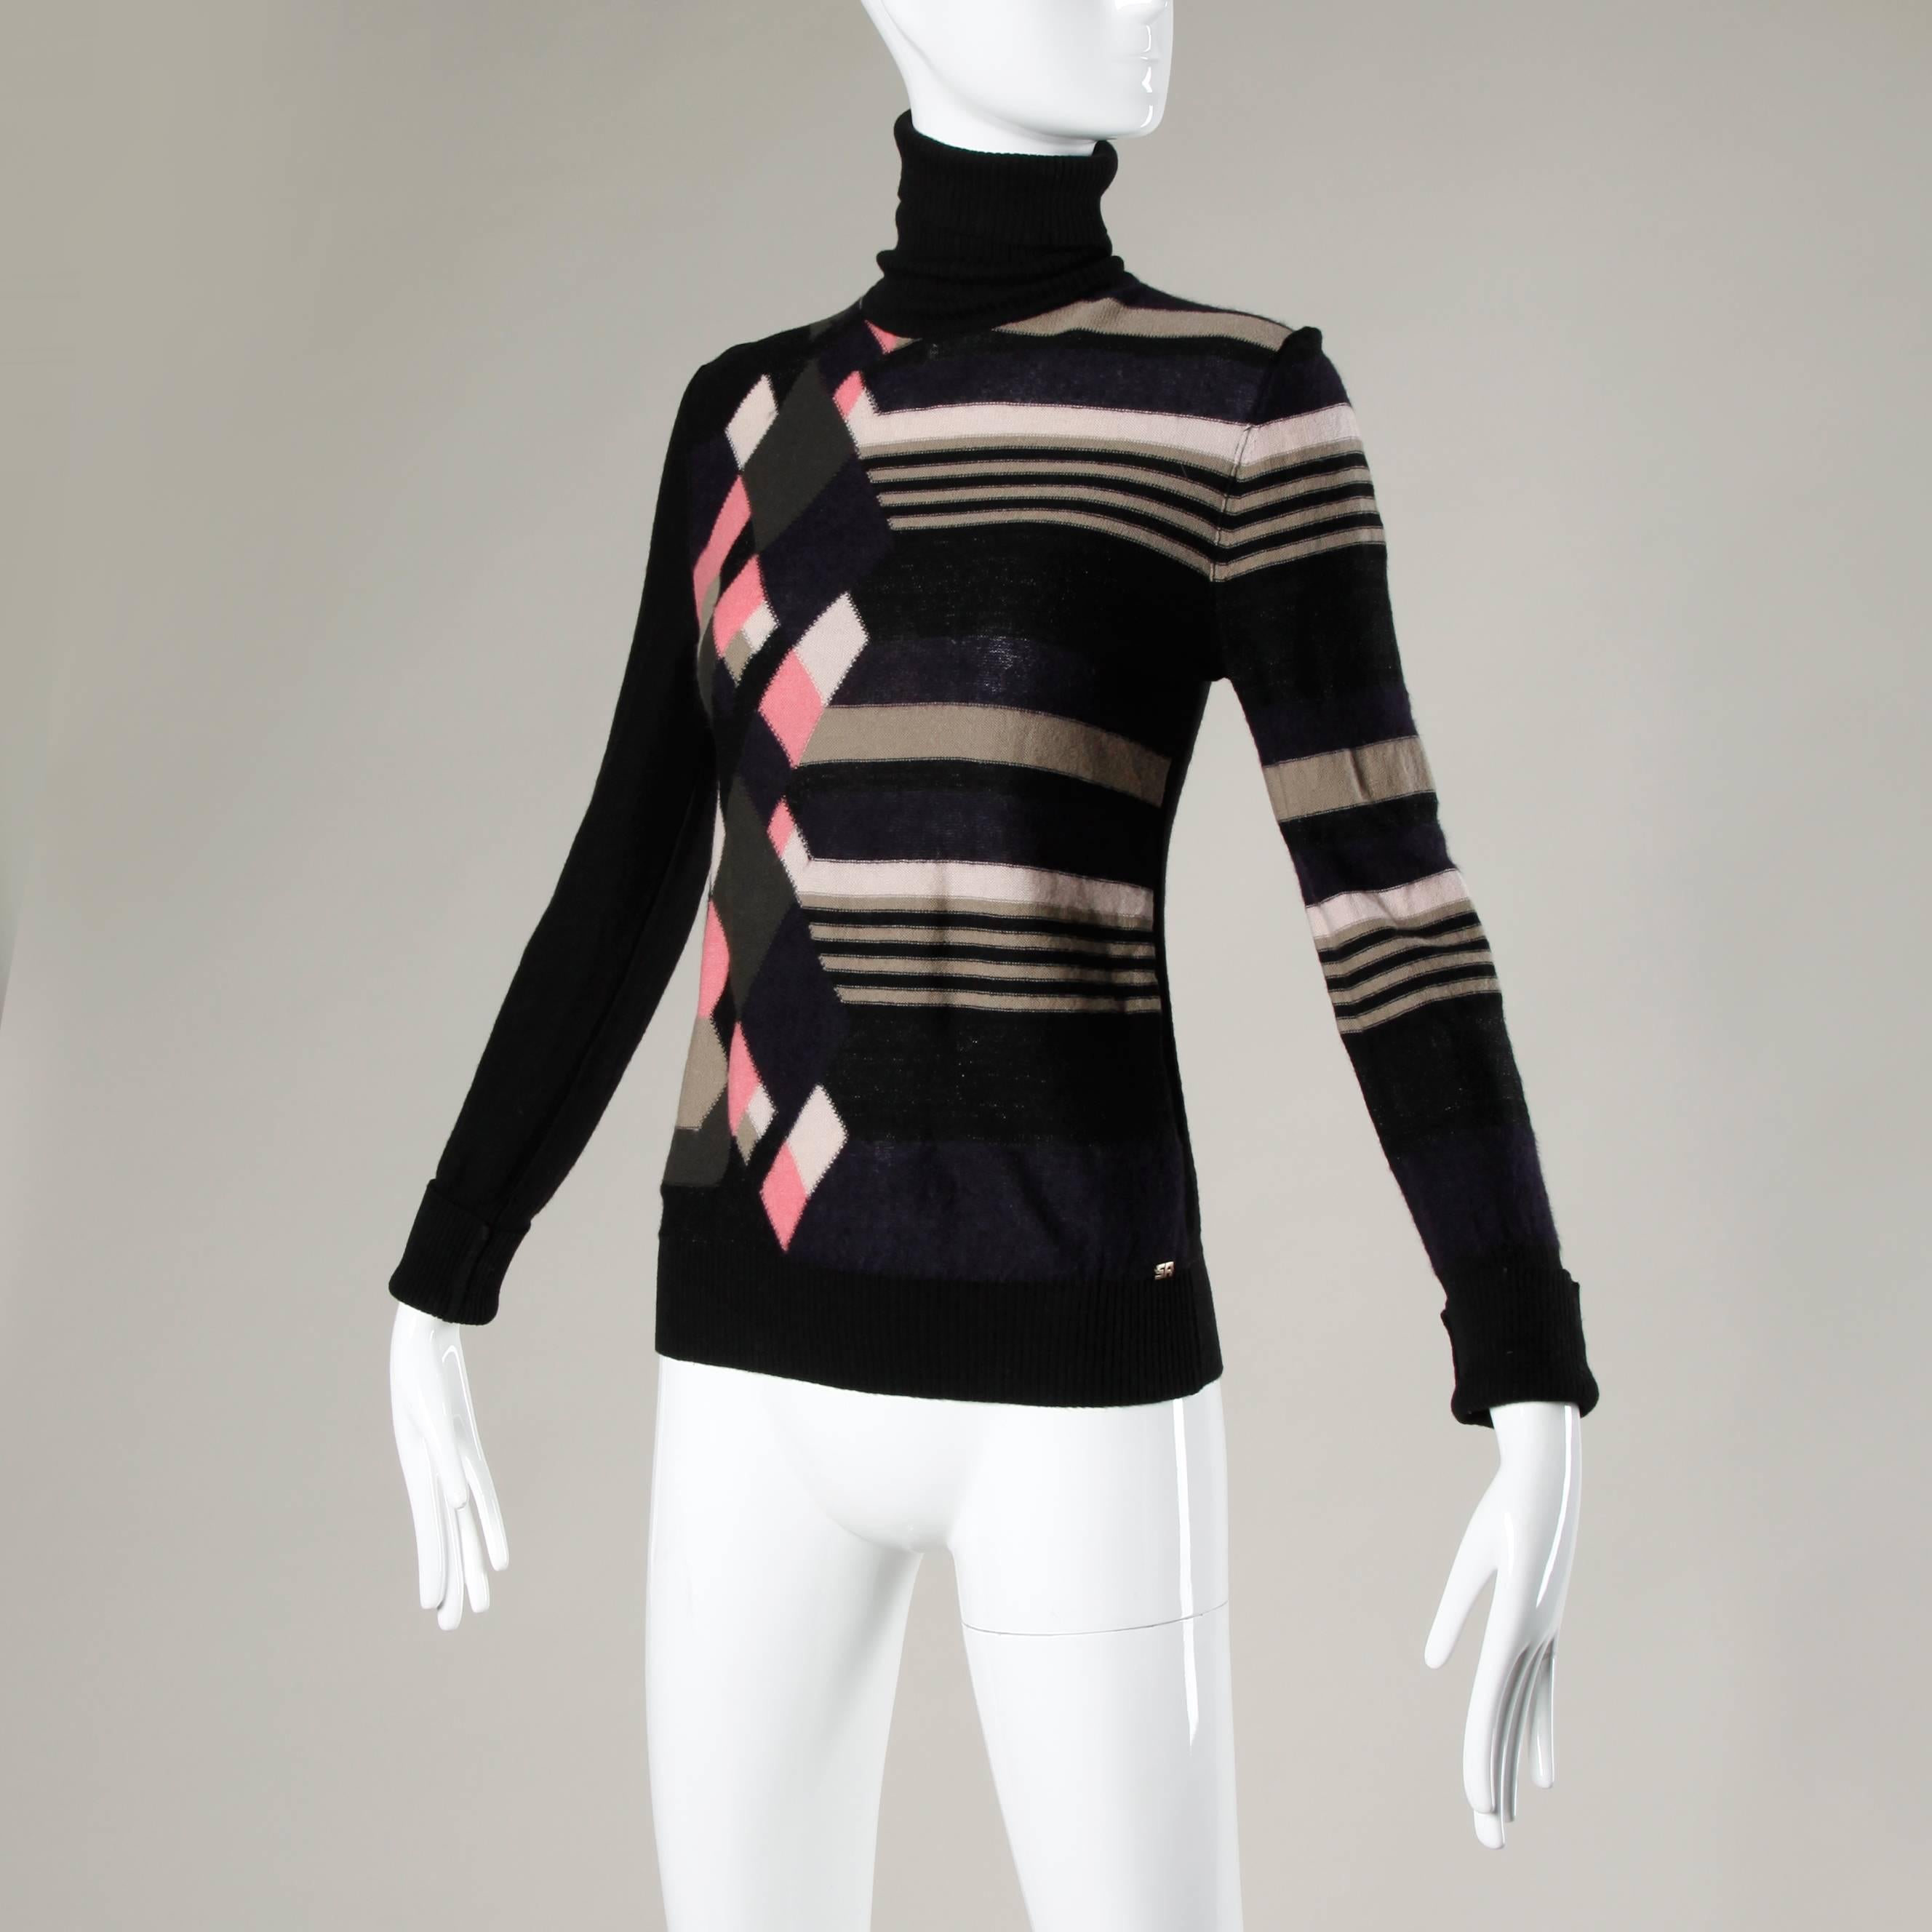 Unlined
No Closure/ Fabric Contains Stretch
Marked Size: 40
Color: Black/ Deep Purple/ Raw Umber/ Beige/ White/ Pink
Fabric: 90% Wool/ 10%Cashmere
Label: Sonia Rykiel

Measurements:

Bust: 34